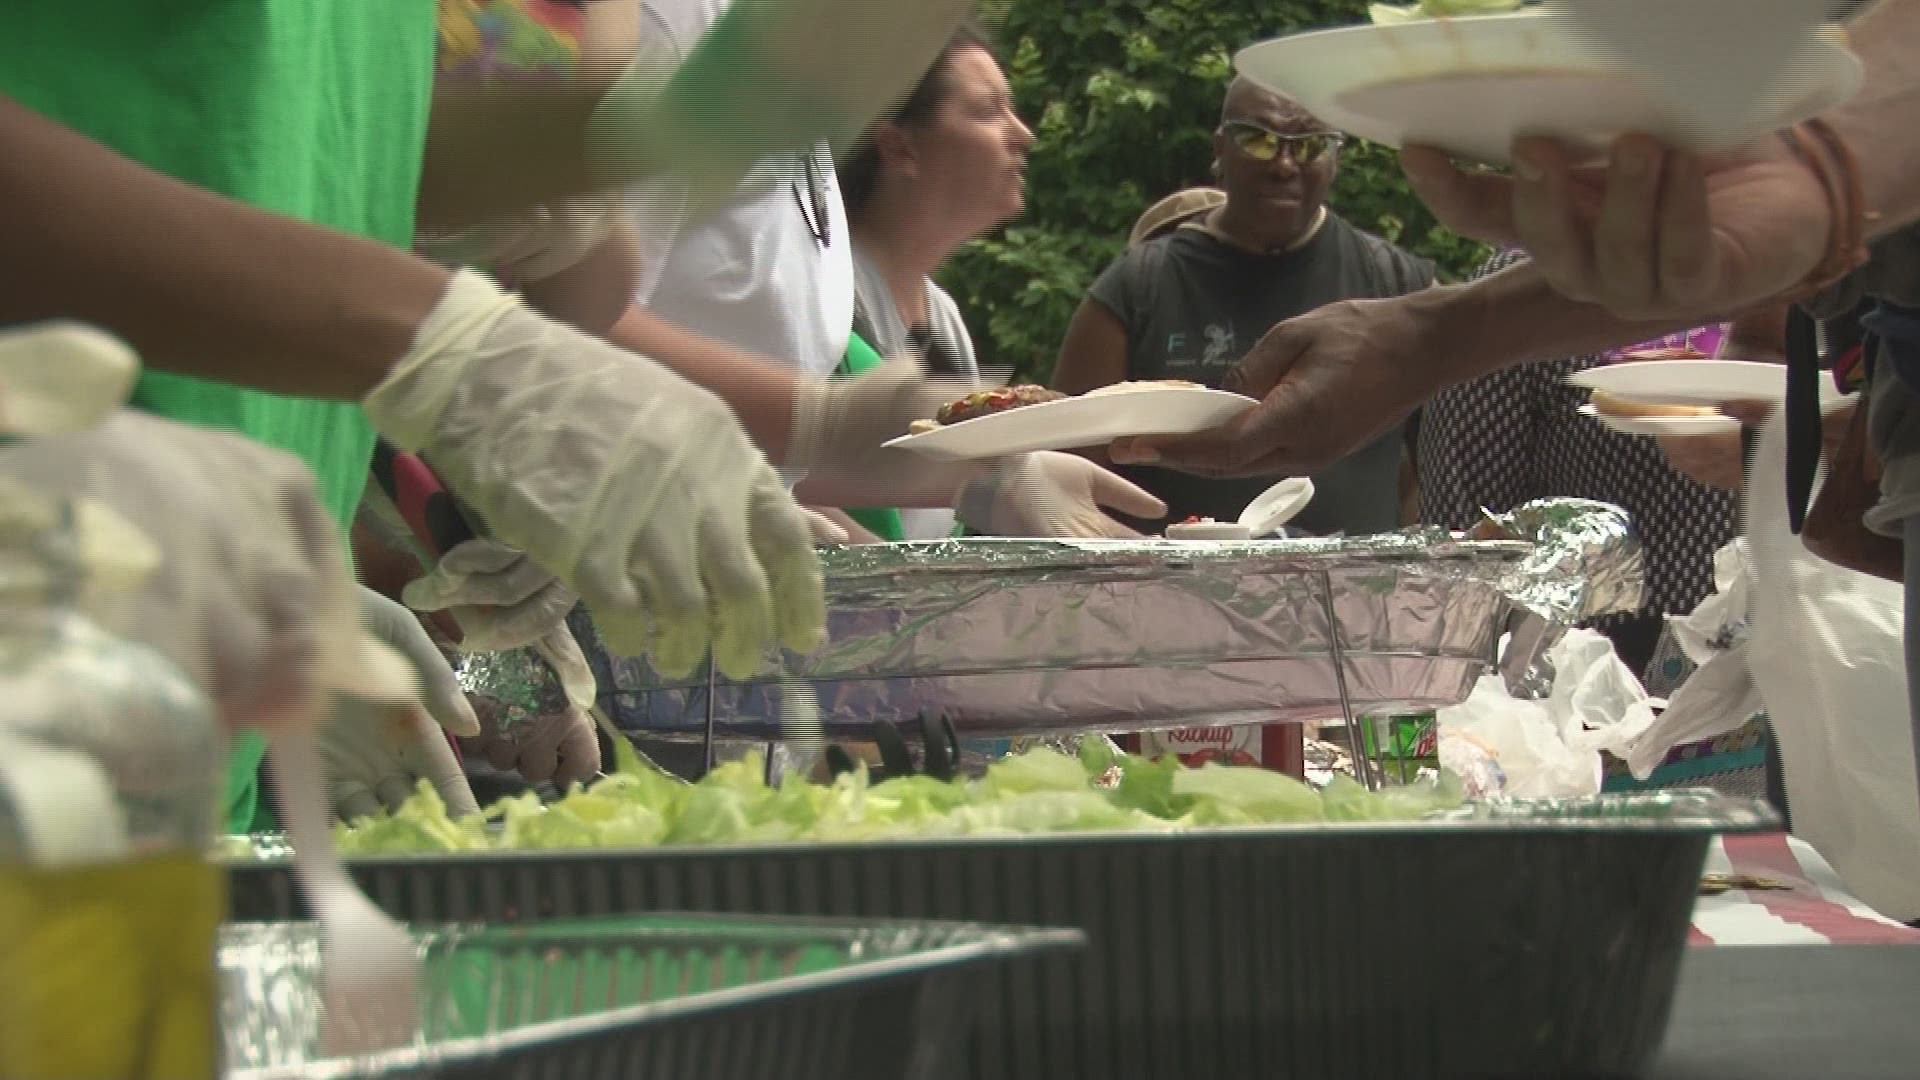 The Helping Hands 'Green Team' feeds homeless veterans for Memorial Day during a cookout.